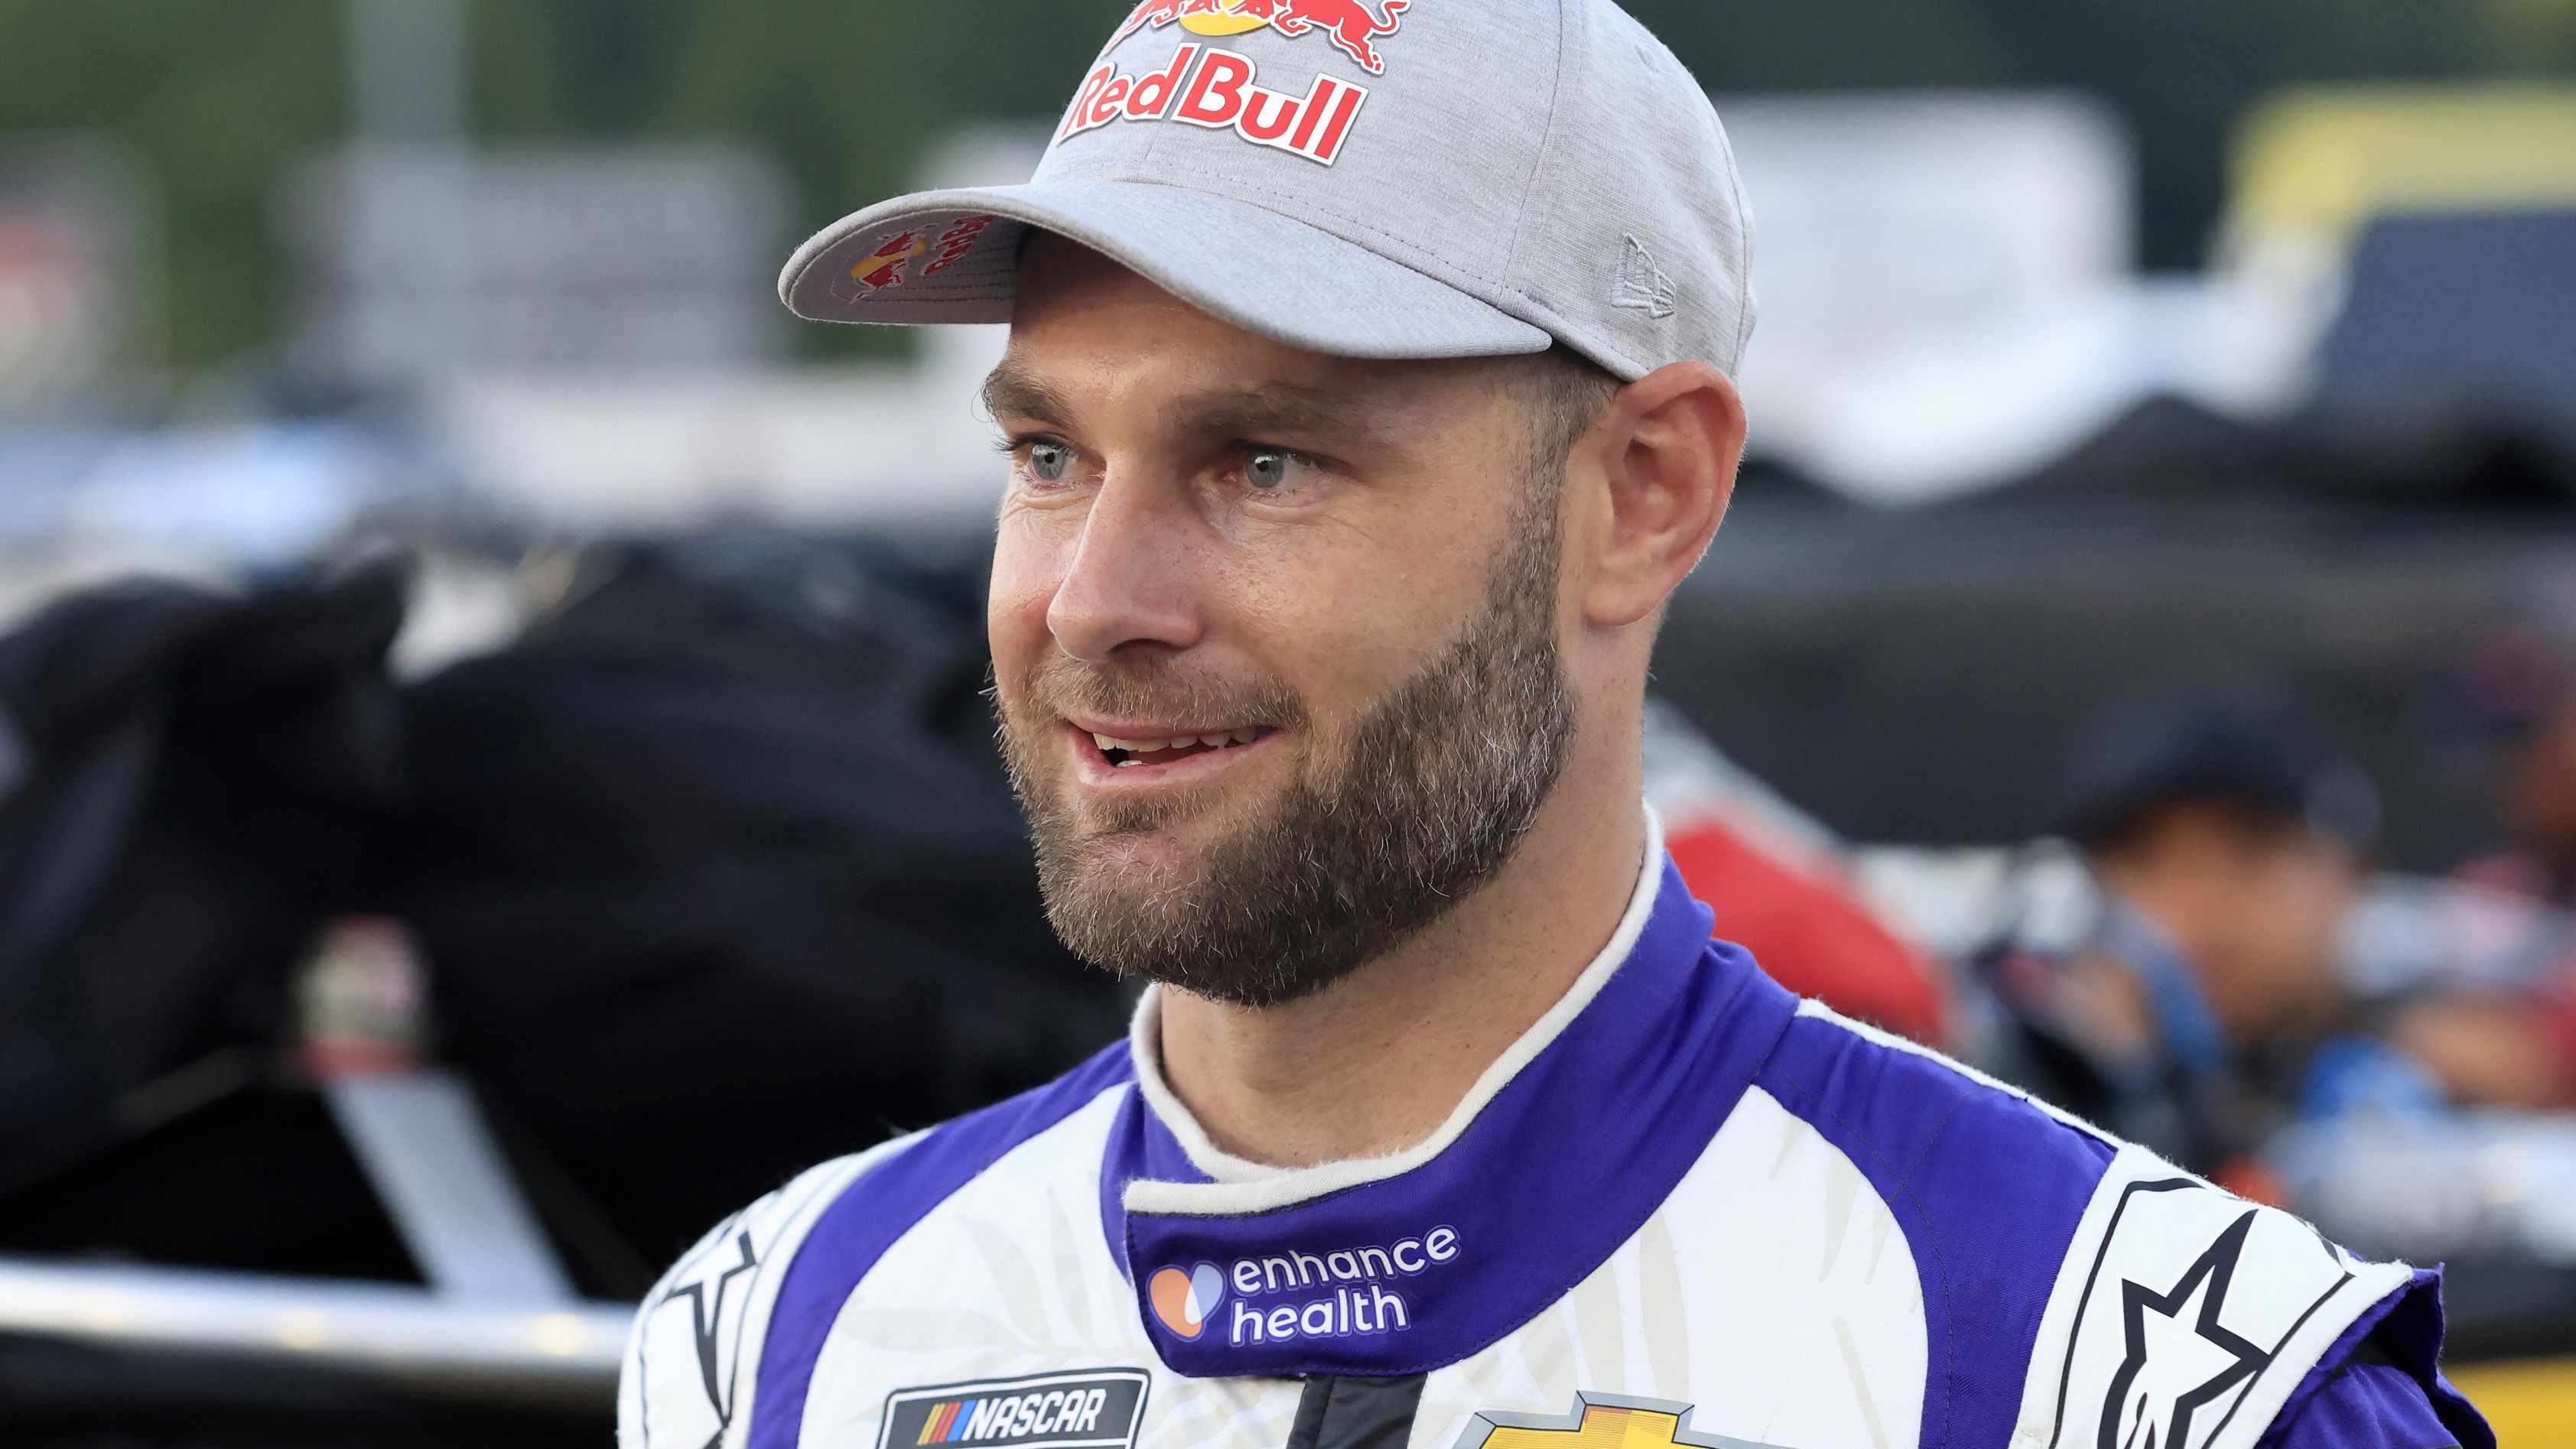 Shane van Gisbergen is set to continue racing in the NASCAR Cup Series in 2024.